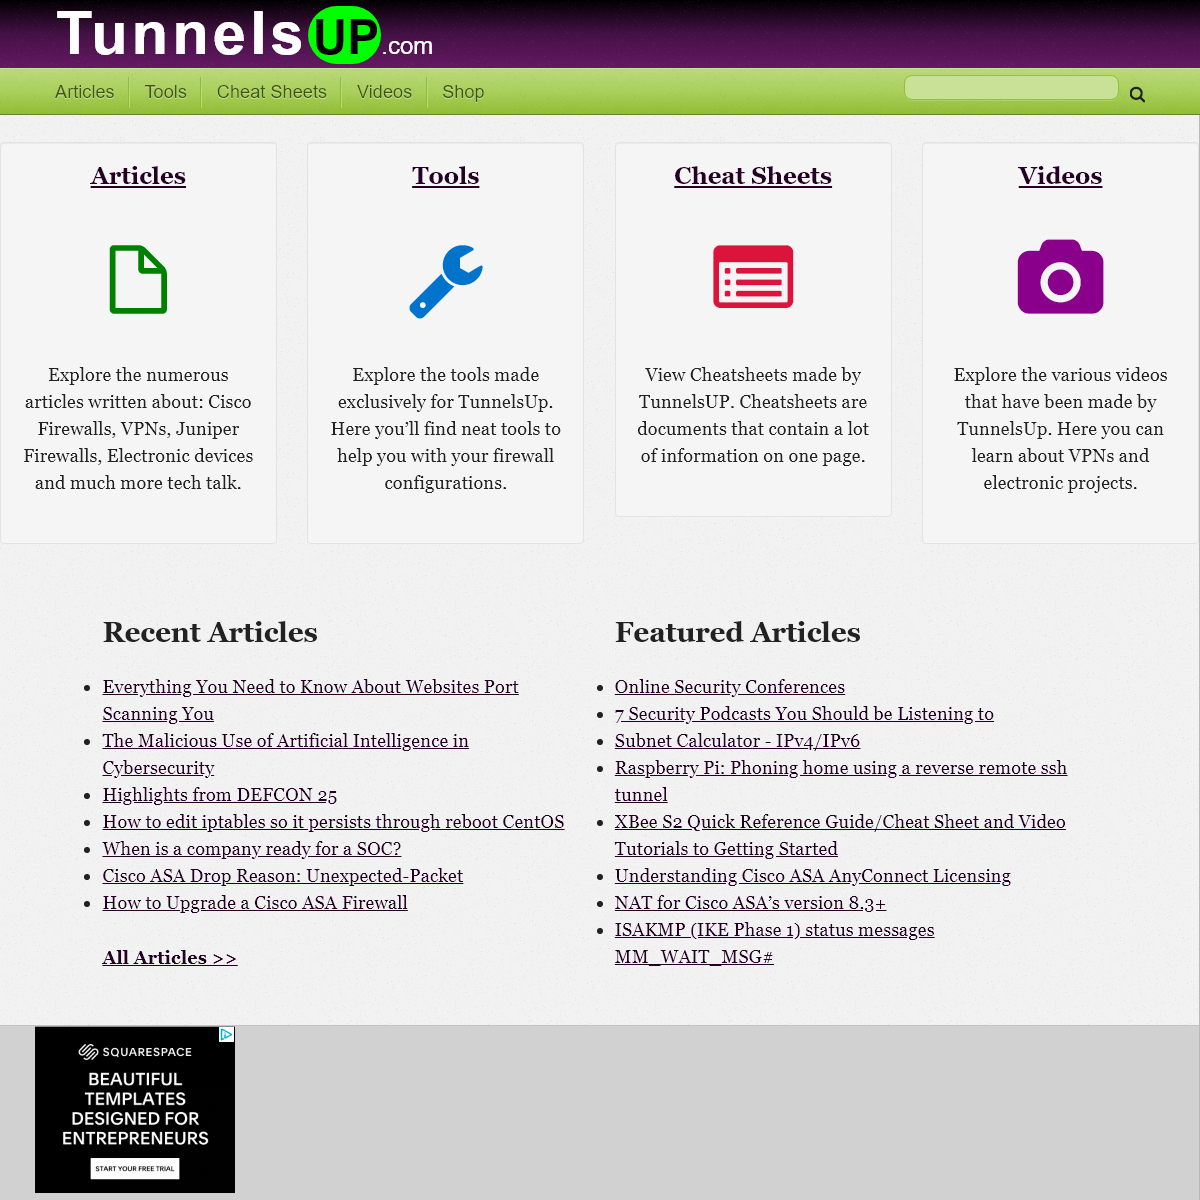 A complete backup of tunnelsup.com